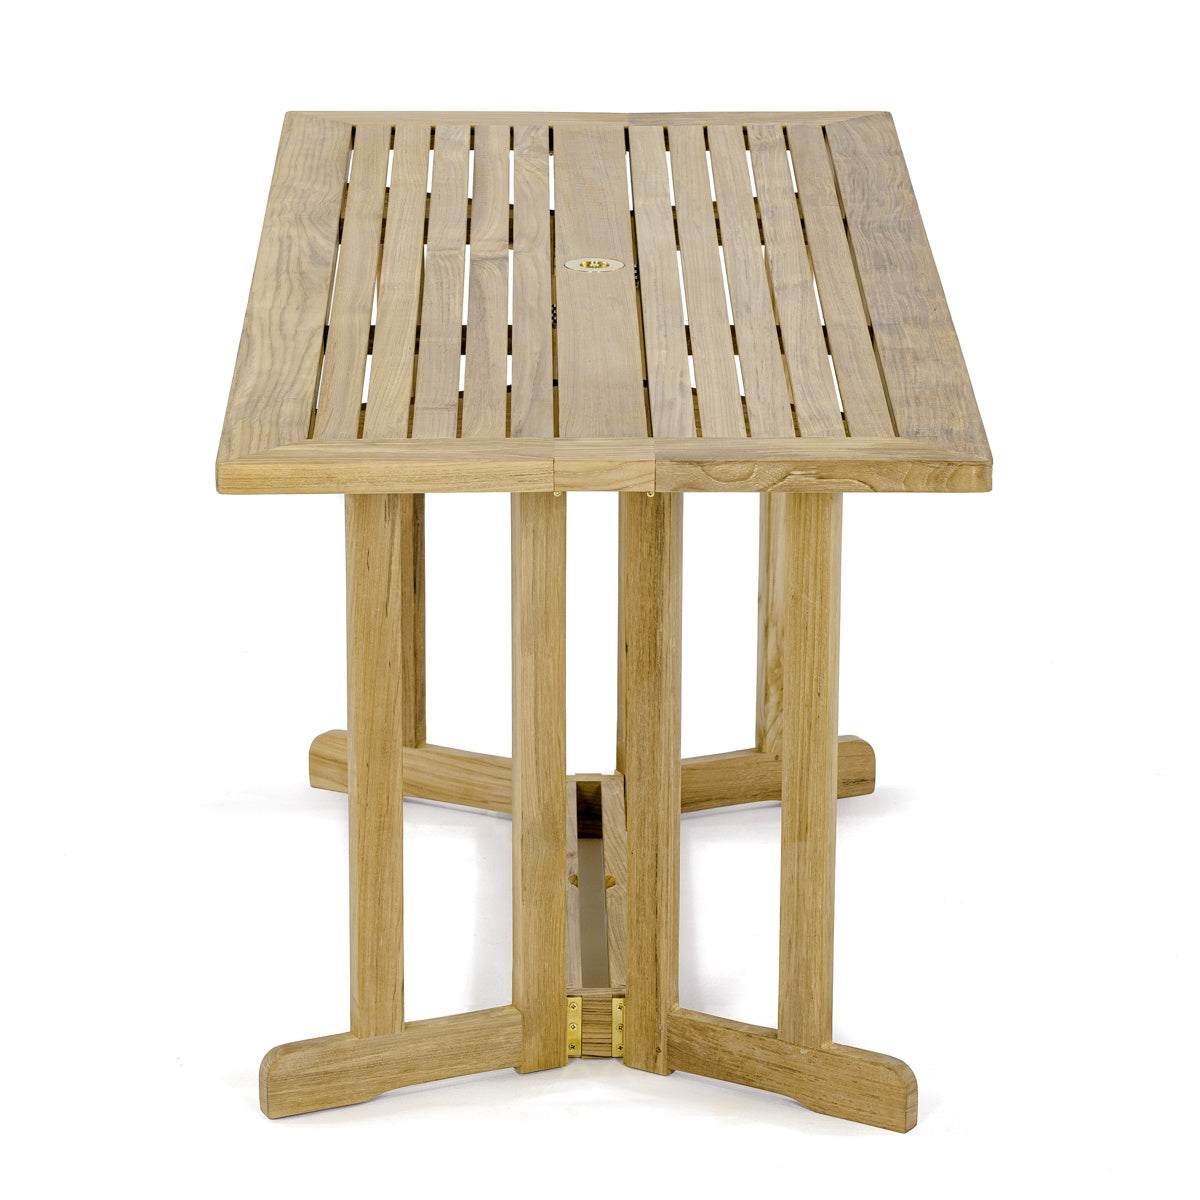 Westminster Teak - Nevis Table Replaced by 15663S - 15663